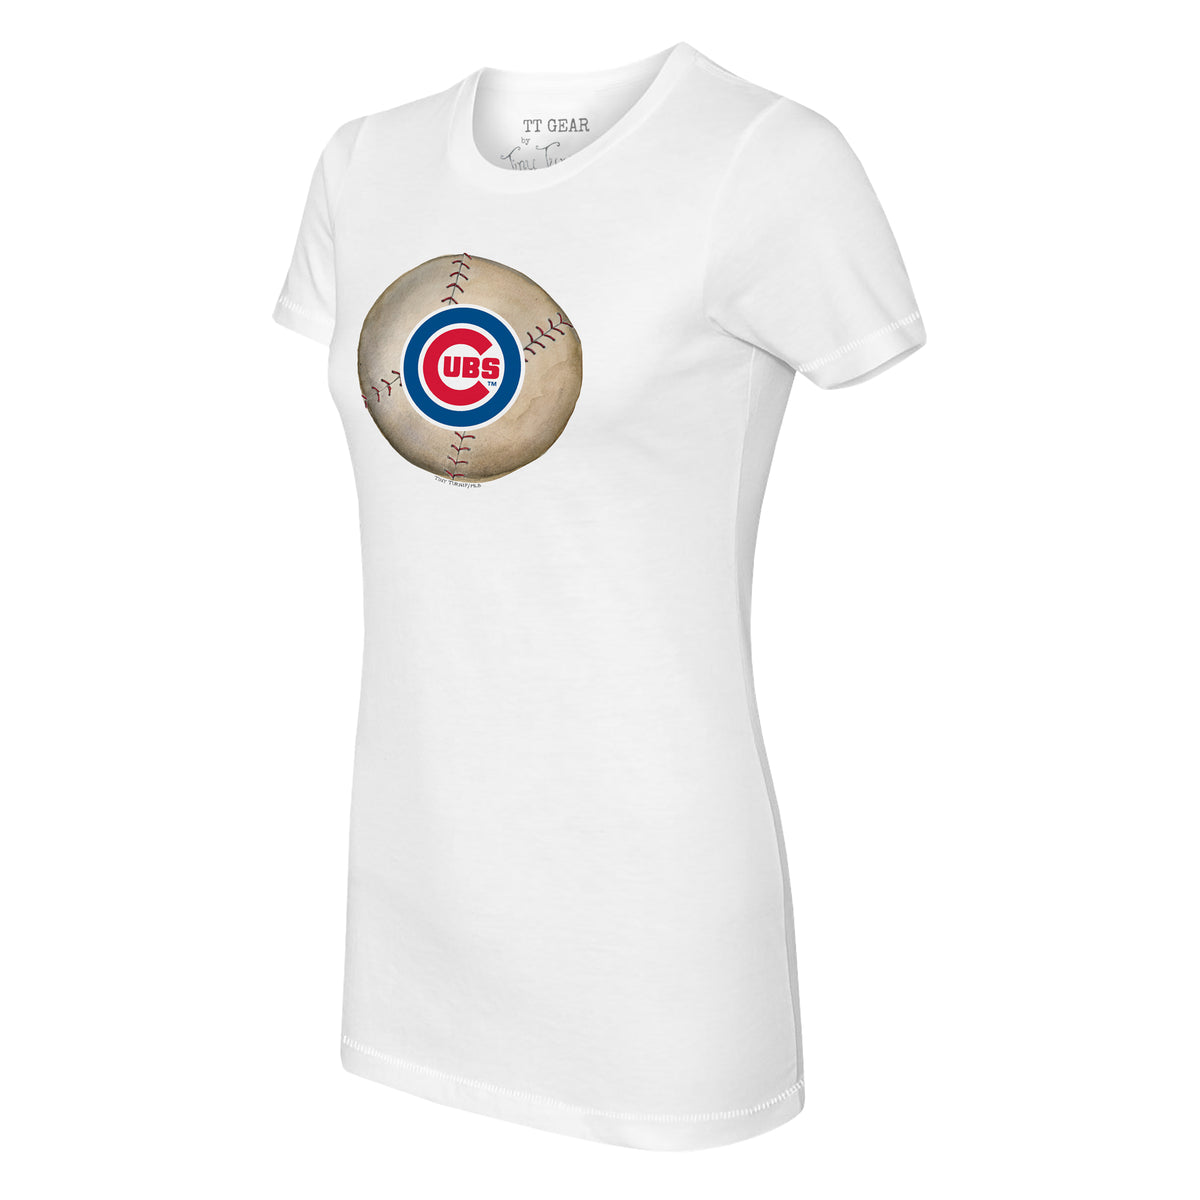 Chicago Cubs Stitched Baseball Tee Shirt